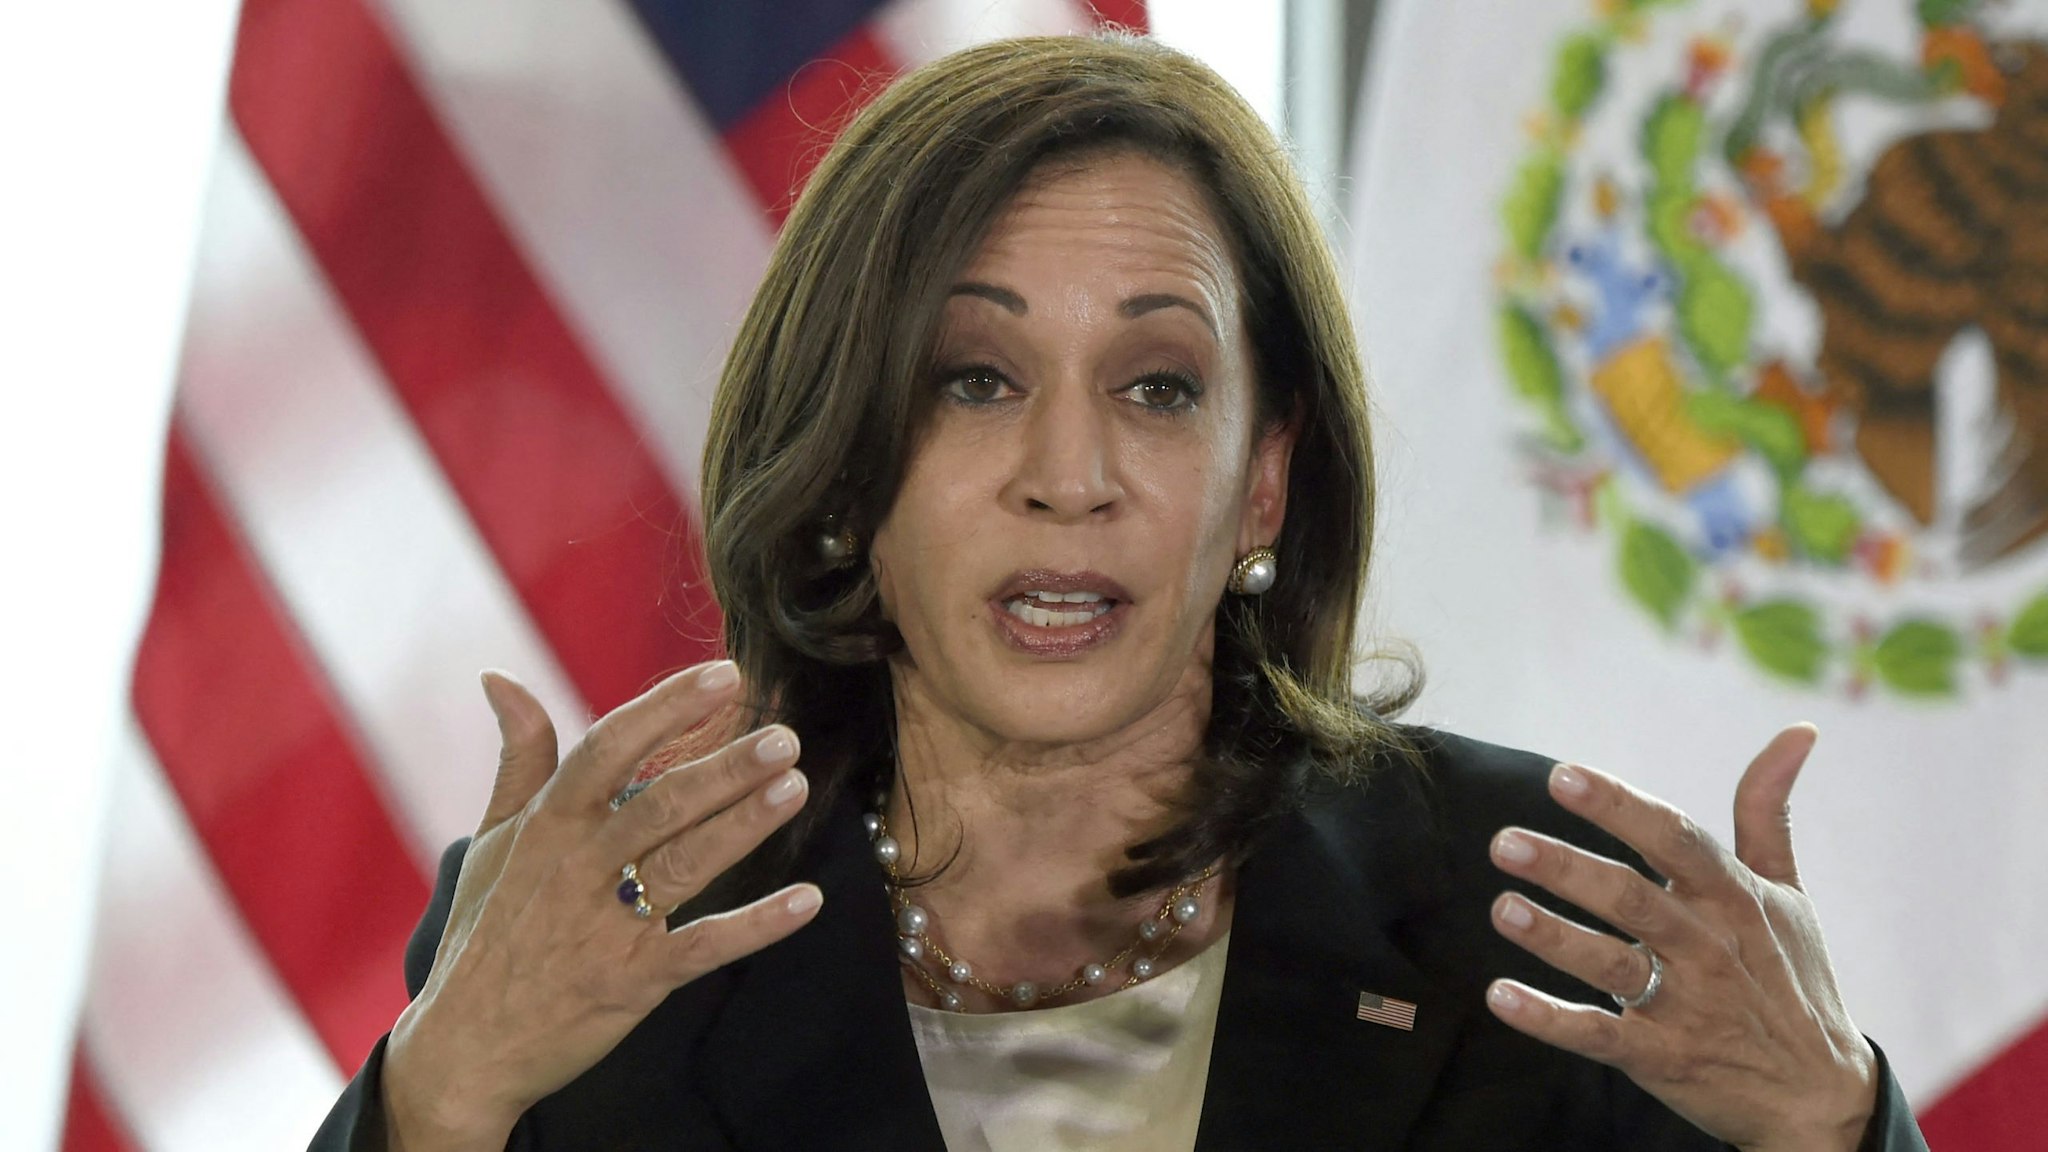 US Vice President Kamala Harris speaks during a press conference in Mexico City, on June 8, 2021. - US Vice President Kamala Harris held talks with Mexican President Andres Manuel Lopez Obrador Tuesday during a visit to the region aimed at tackling the "root causes" of a surge in migrant arrivals.